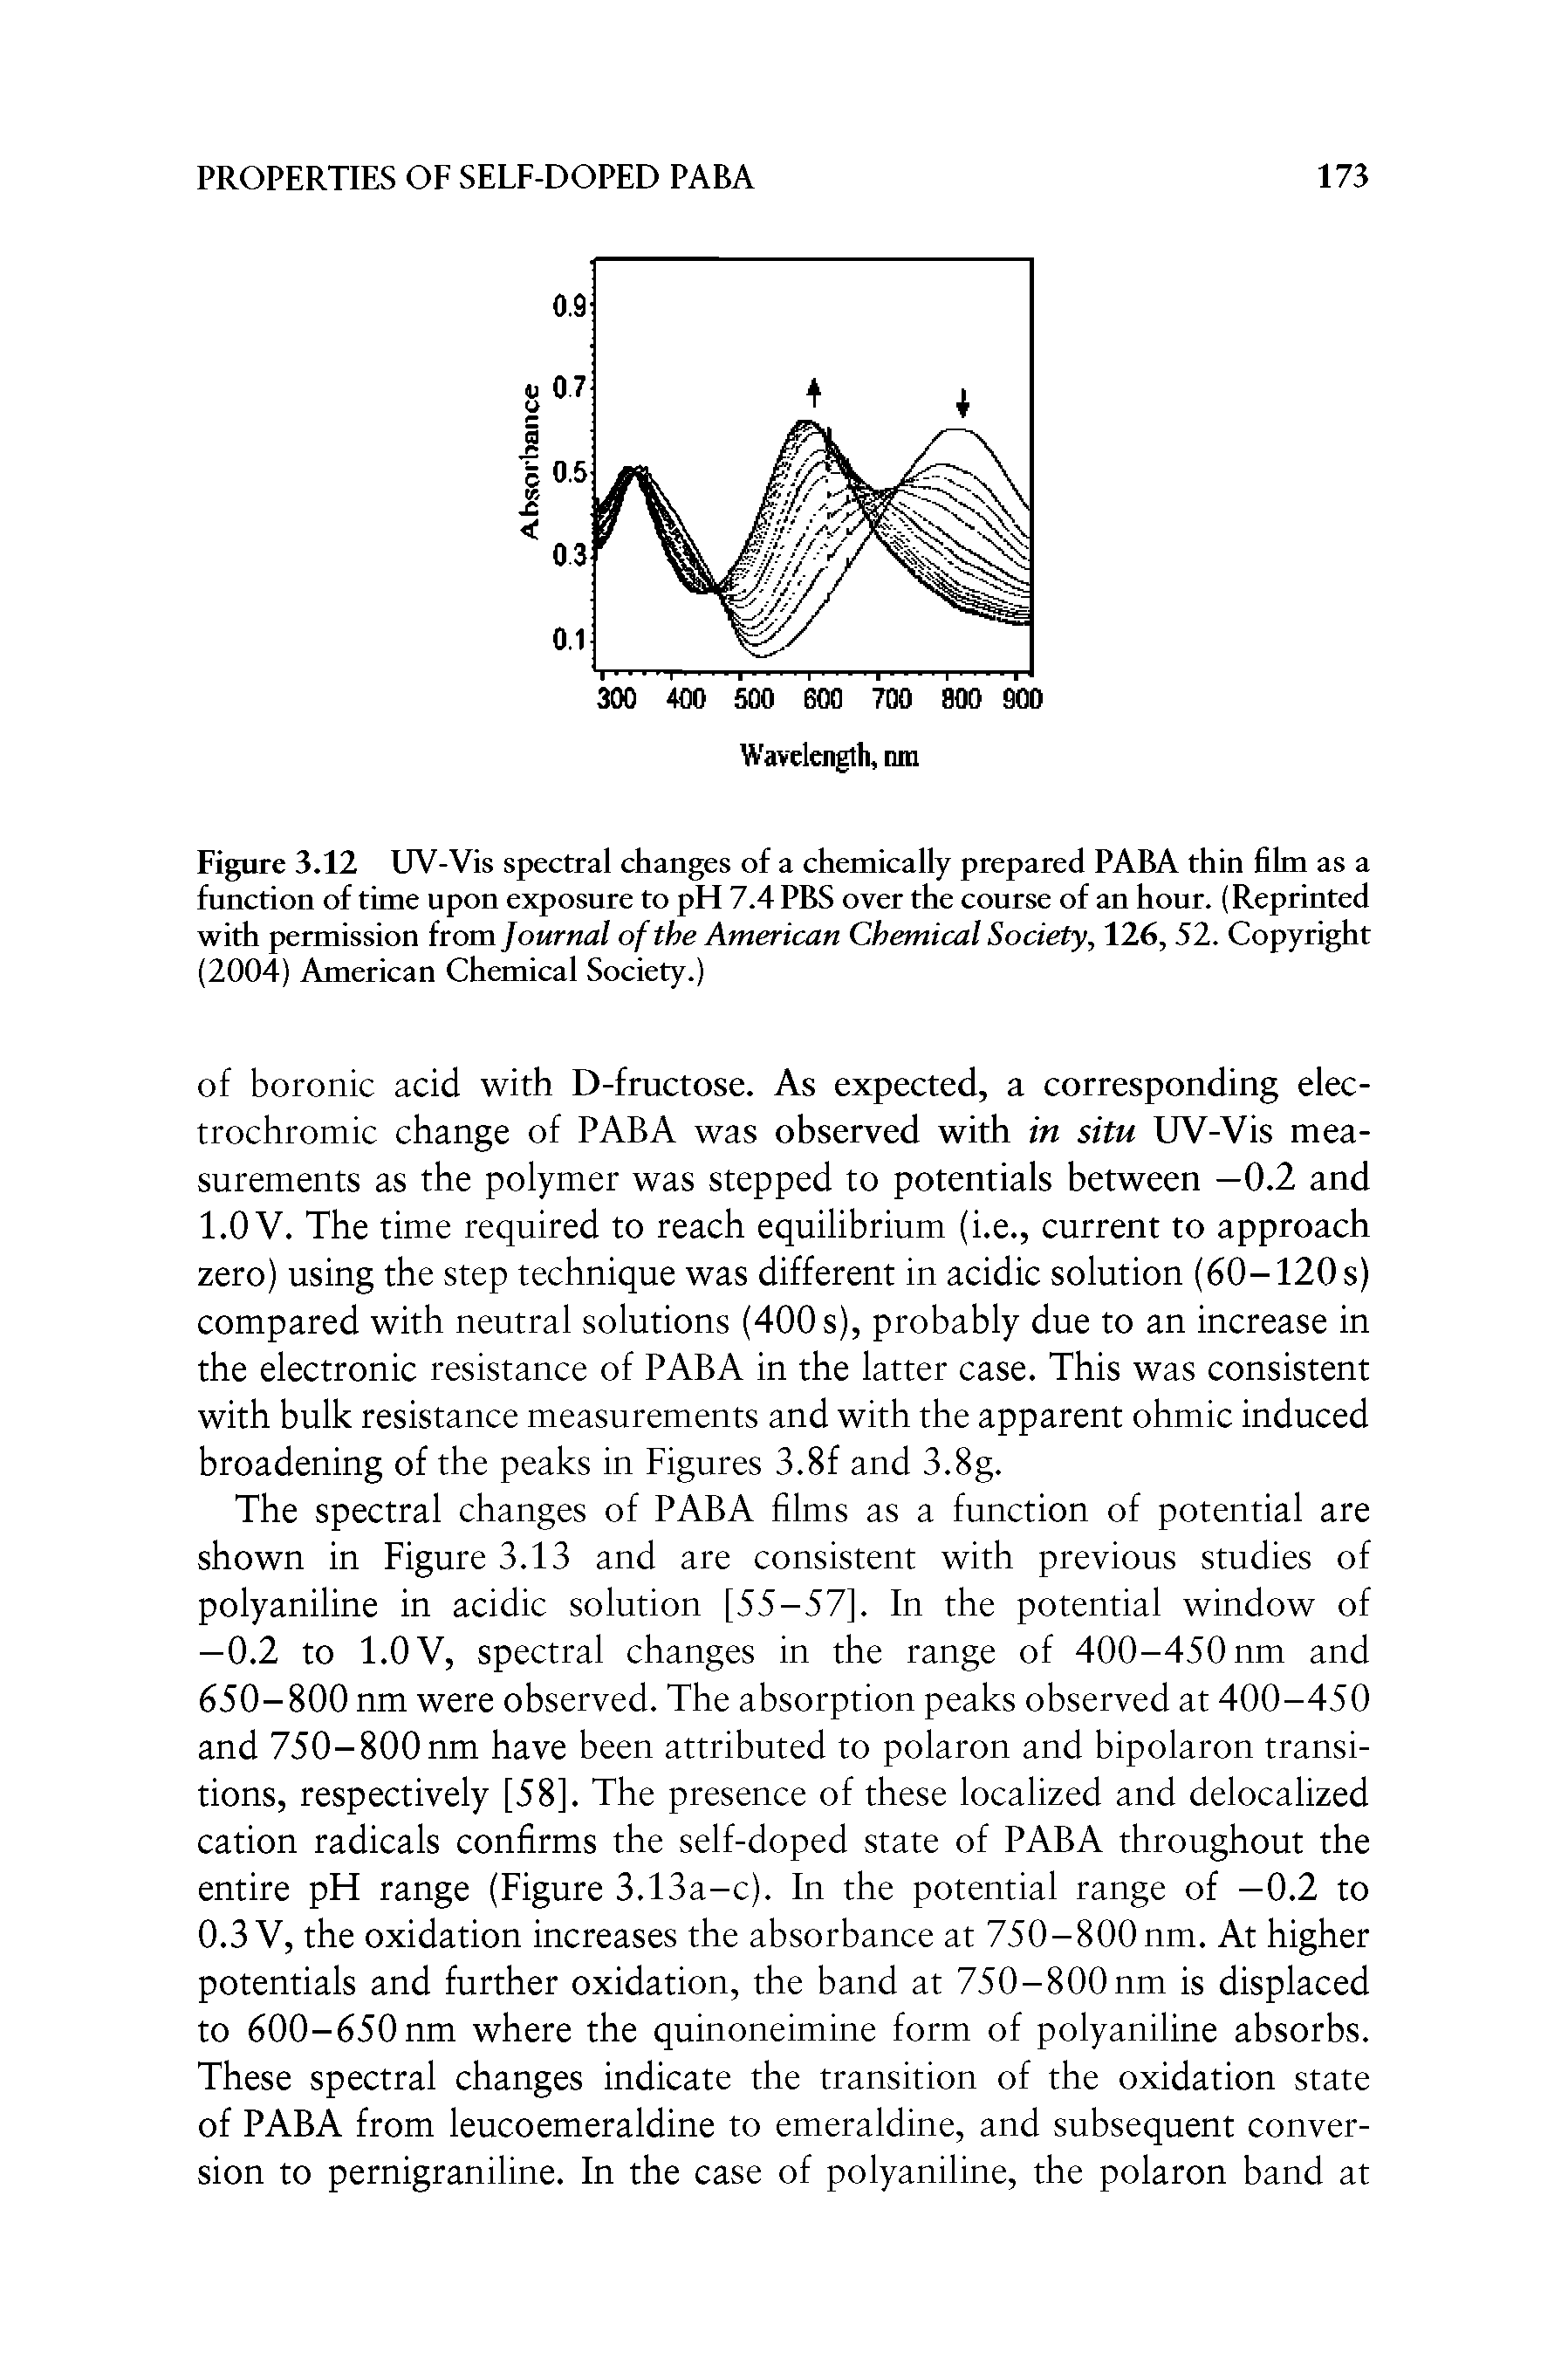 Figure 3.12 UV-Vis spectral changes of a chemically prepared PABA thin film as a function of time upon exposure to pH 7.4 PBS over the course of an hour. (Reprinted with permission from Journal of the American Chemical Society, 126, 52. Copyright (2004) American Chemical Society.)...